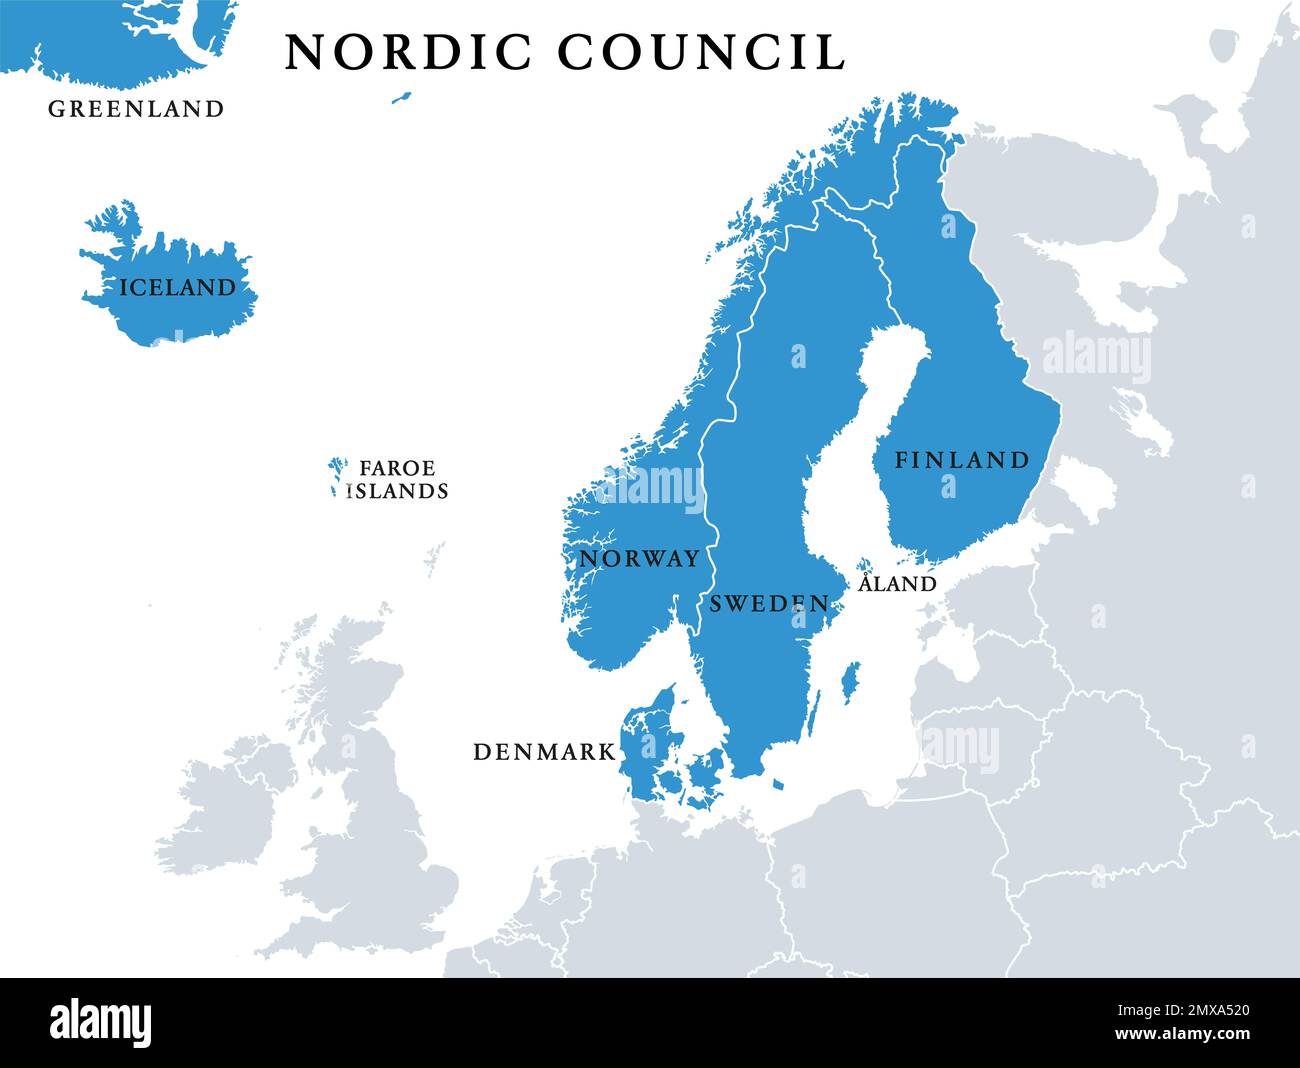 Nordic Council members, political map. Cooperation among Denmark, Finland, Iceland, Norway and Sweden, Faroe Islands, Greenland, Aland. Stock Photo